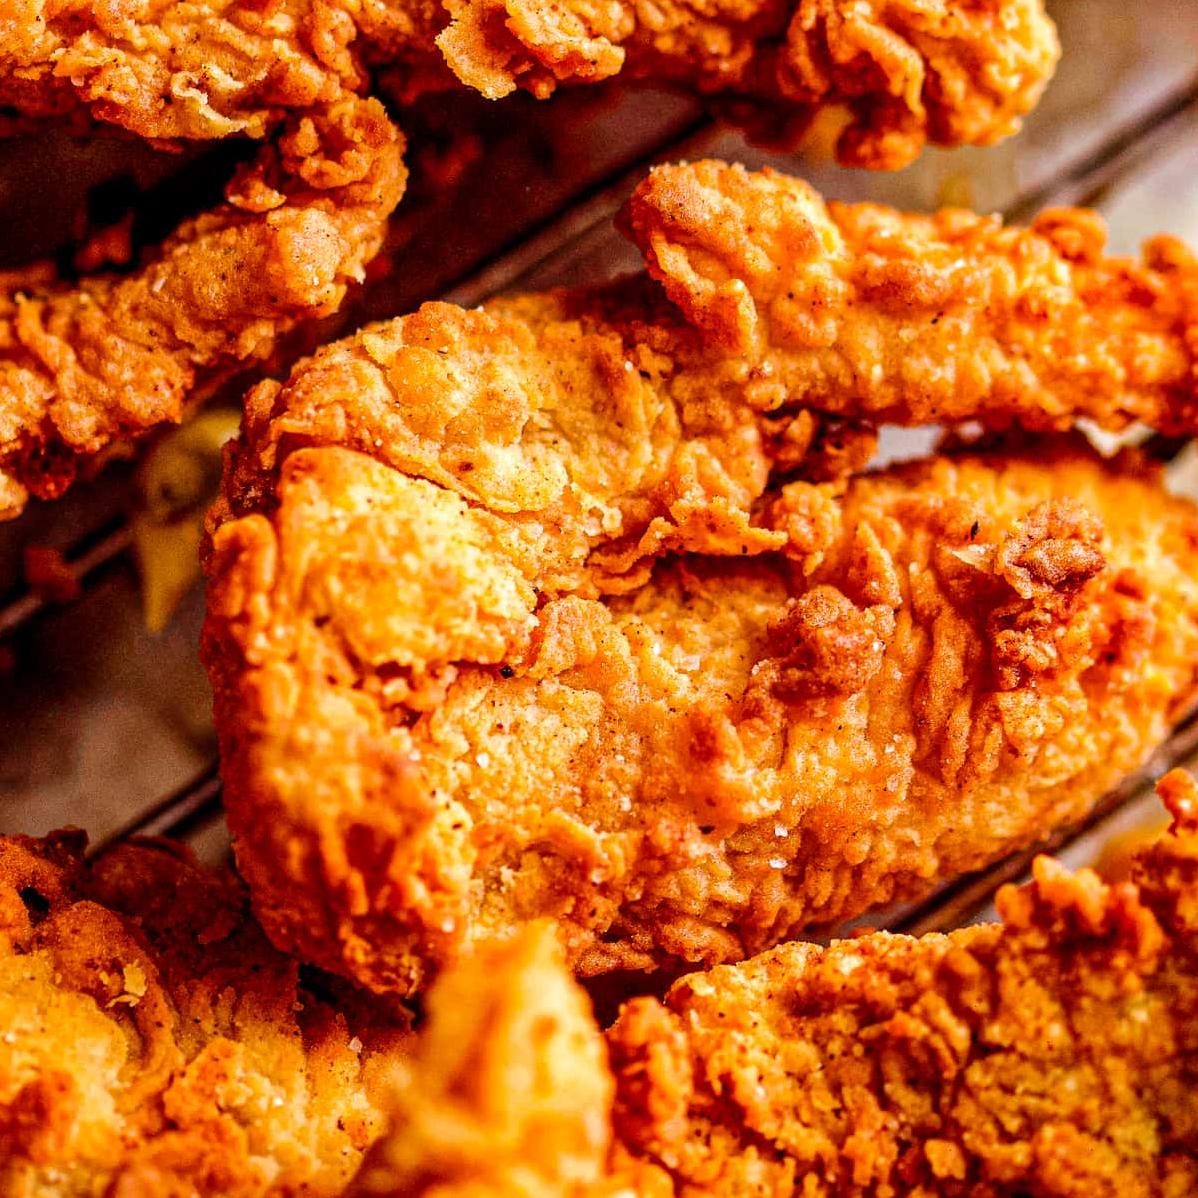  Every bite is bursting with flavor in this southern fried masterpiece.